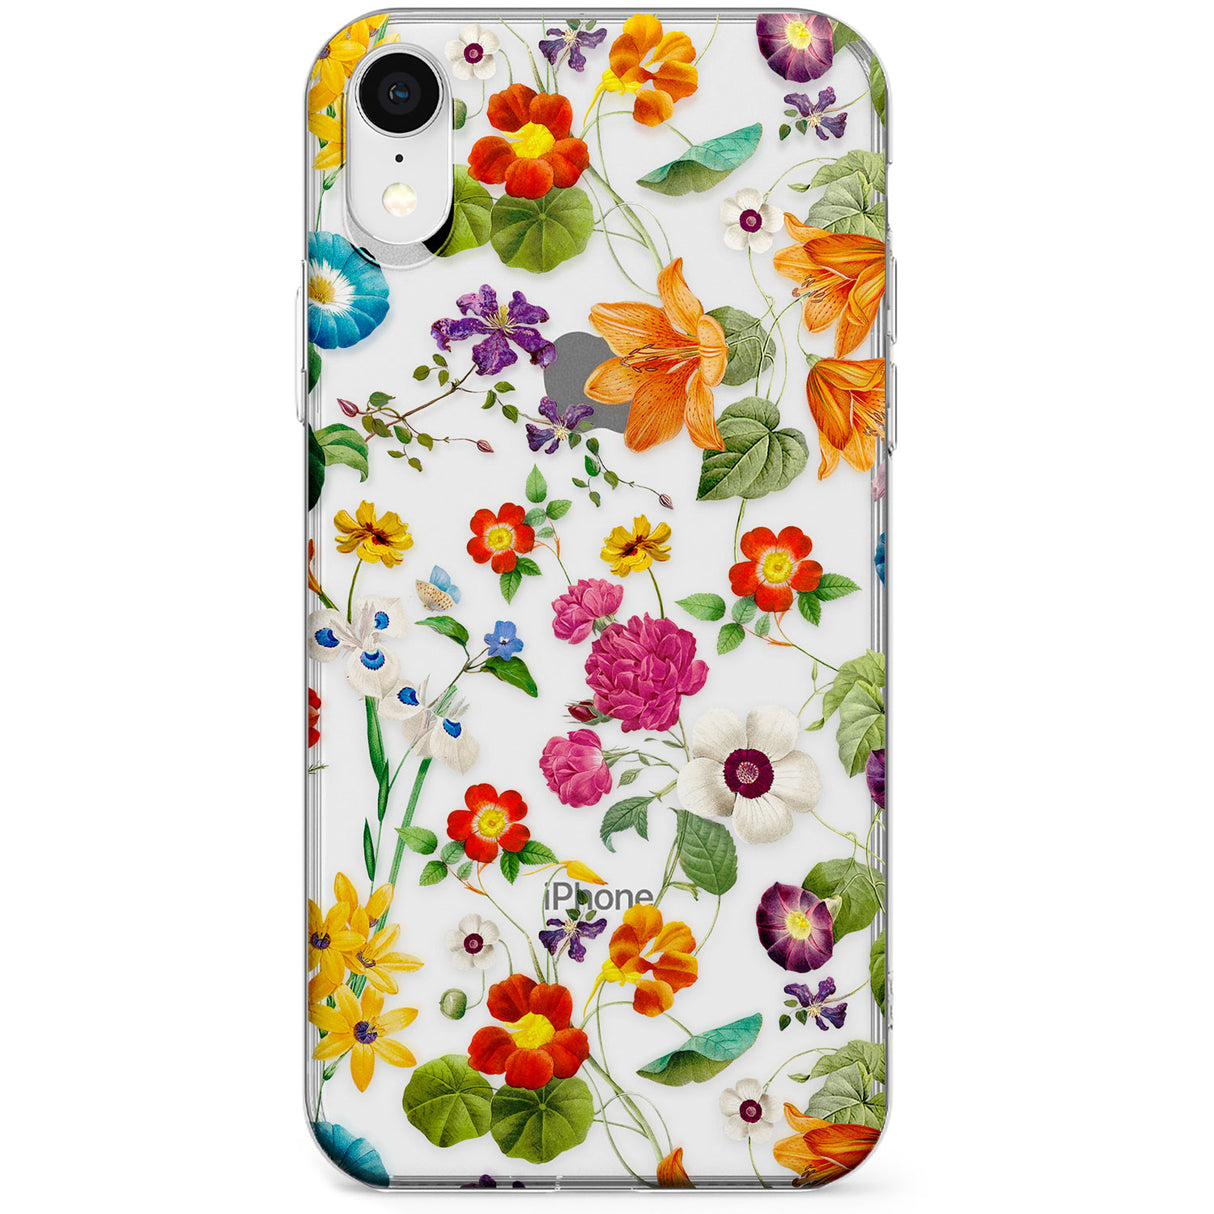 Whimsical Wildflowers Phone Case for iPhone X, XS Max, XR